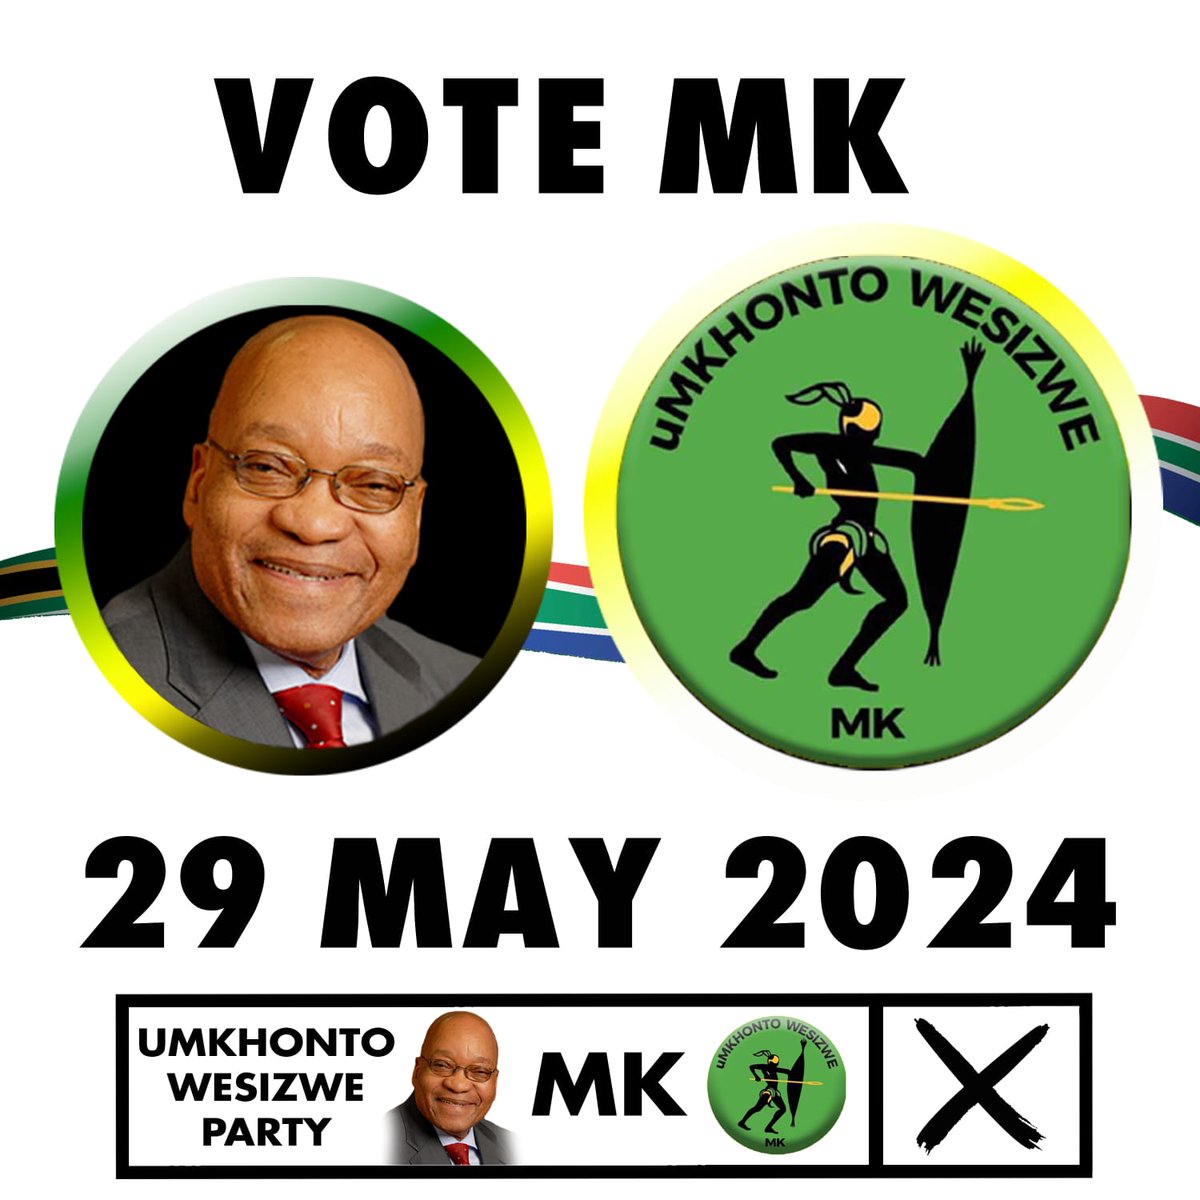 @dr_zsaul1 Thank you for promoting MK Party under the great leadership of President Zuma.  We are indeed going to vote for MK Party in great numbers. #VoteMK2024